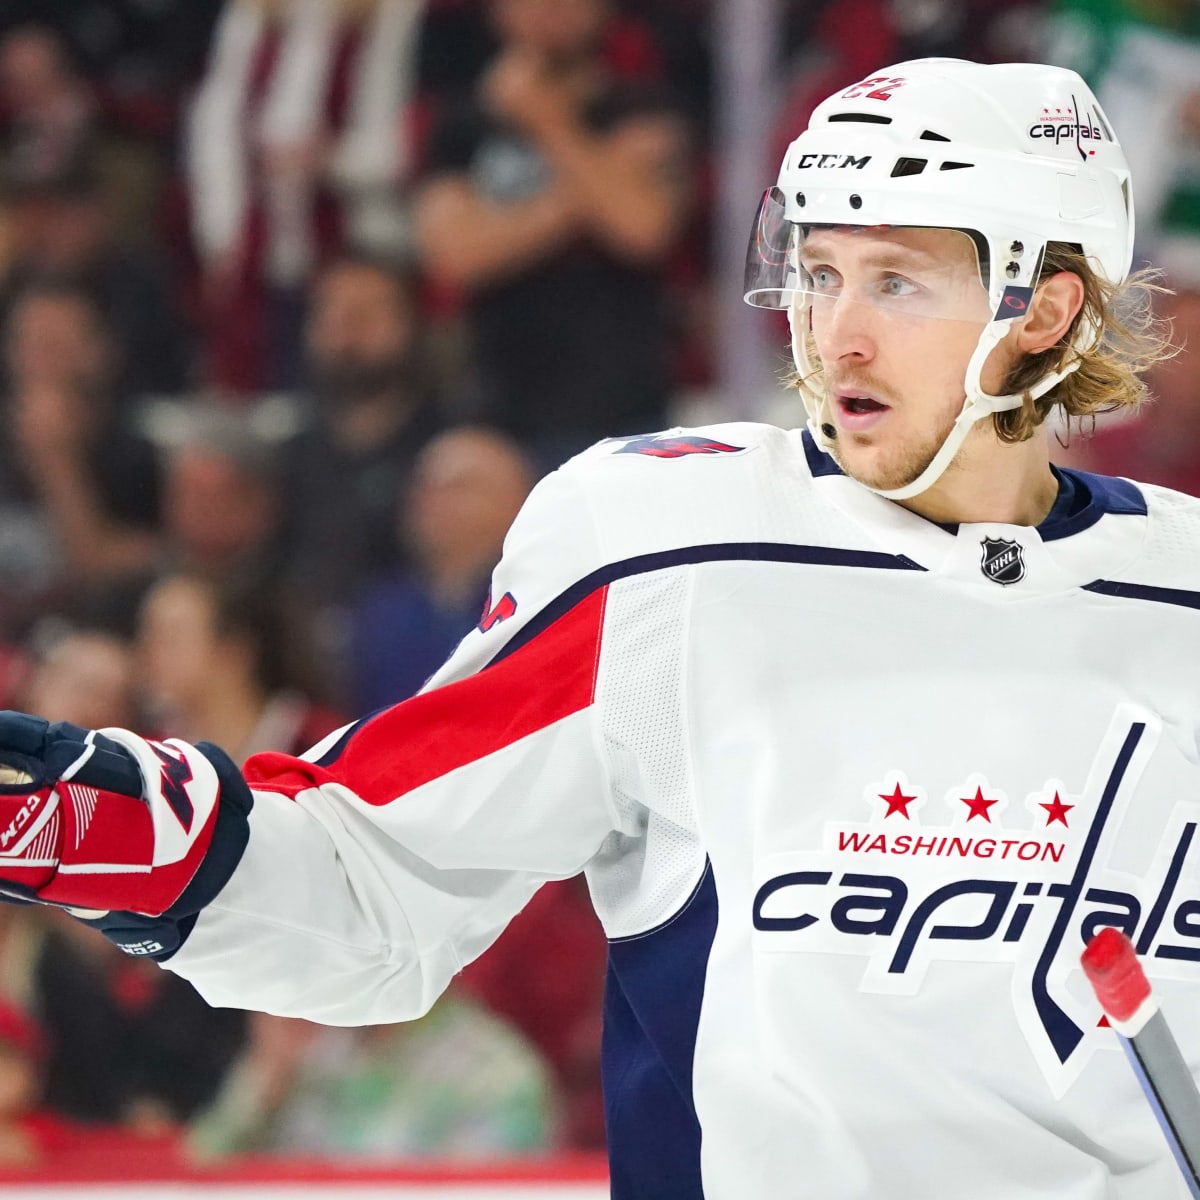 Carl Hagelin reveals pupil in injured eye will never dilate again